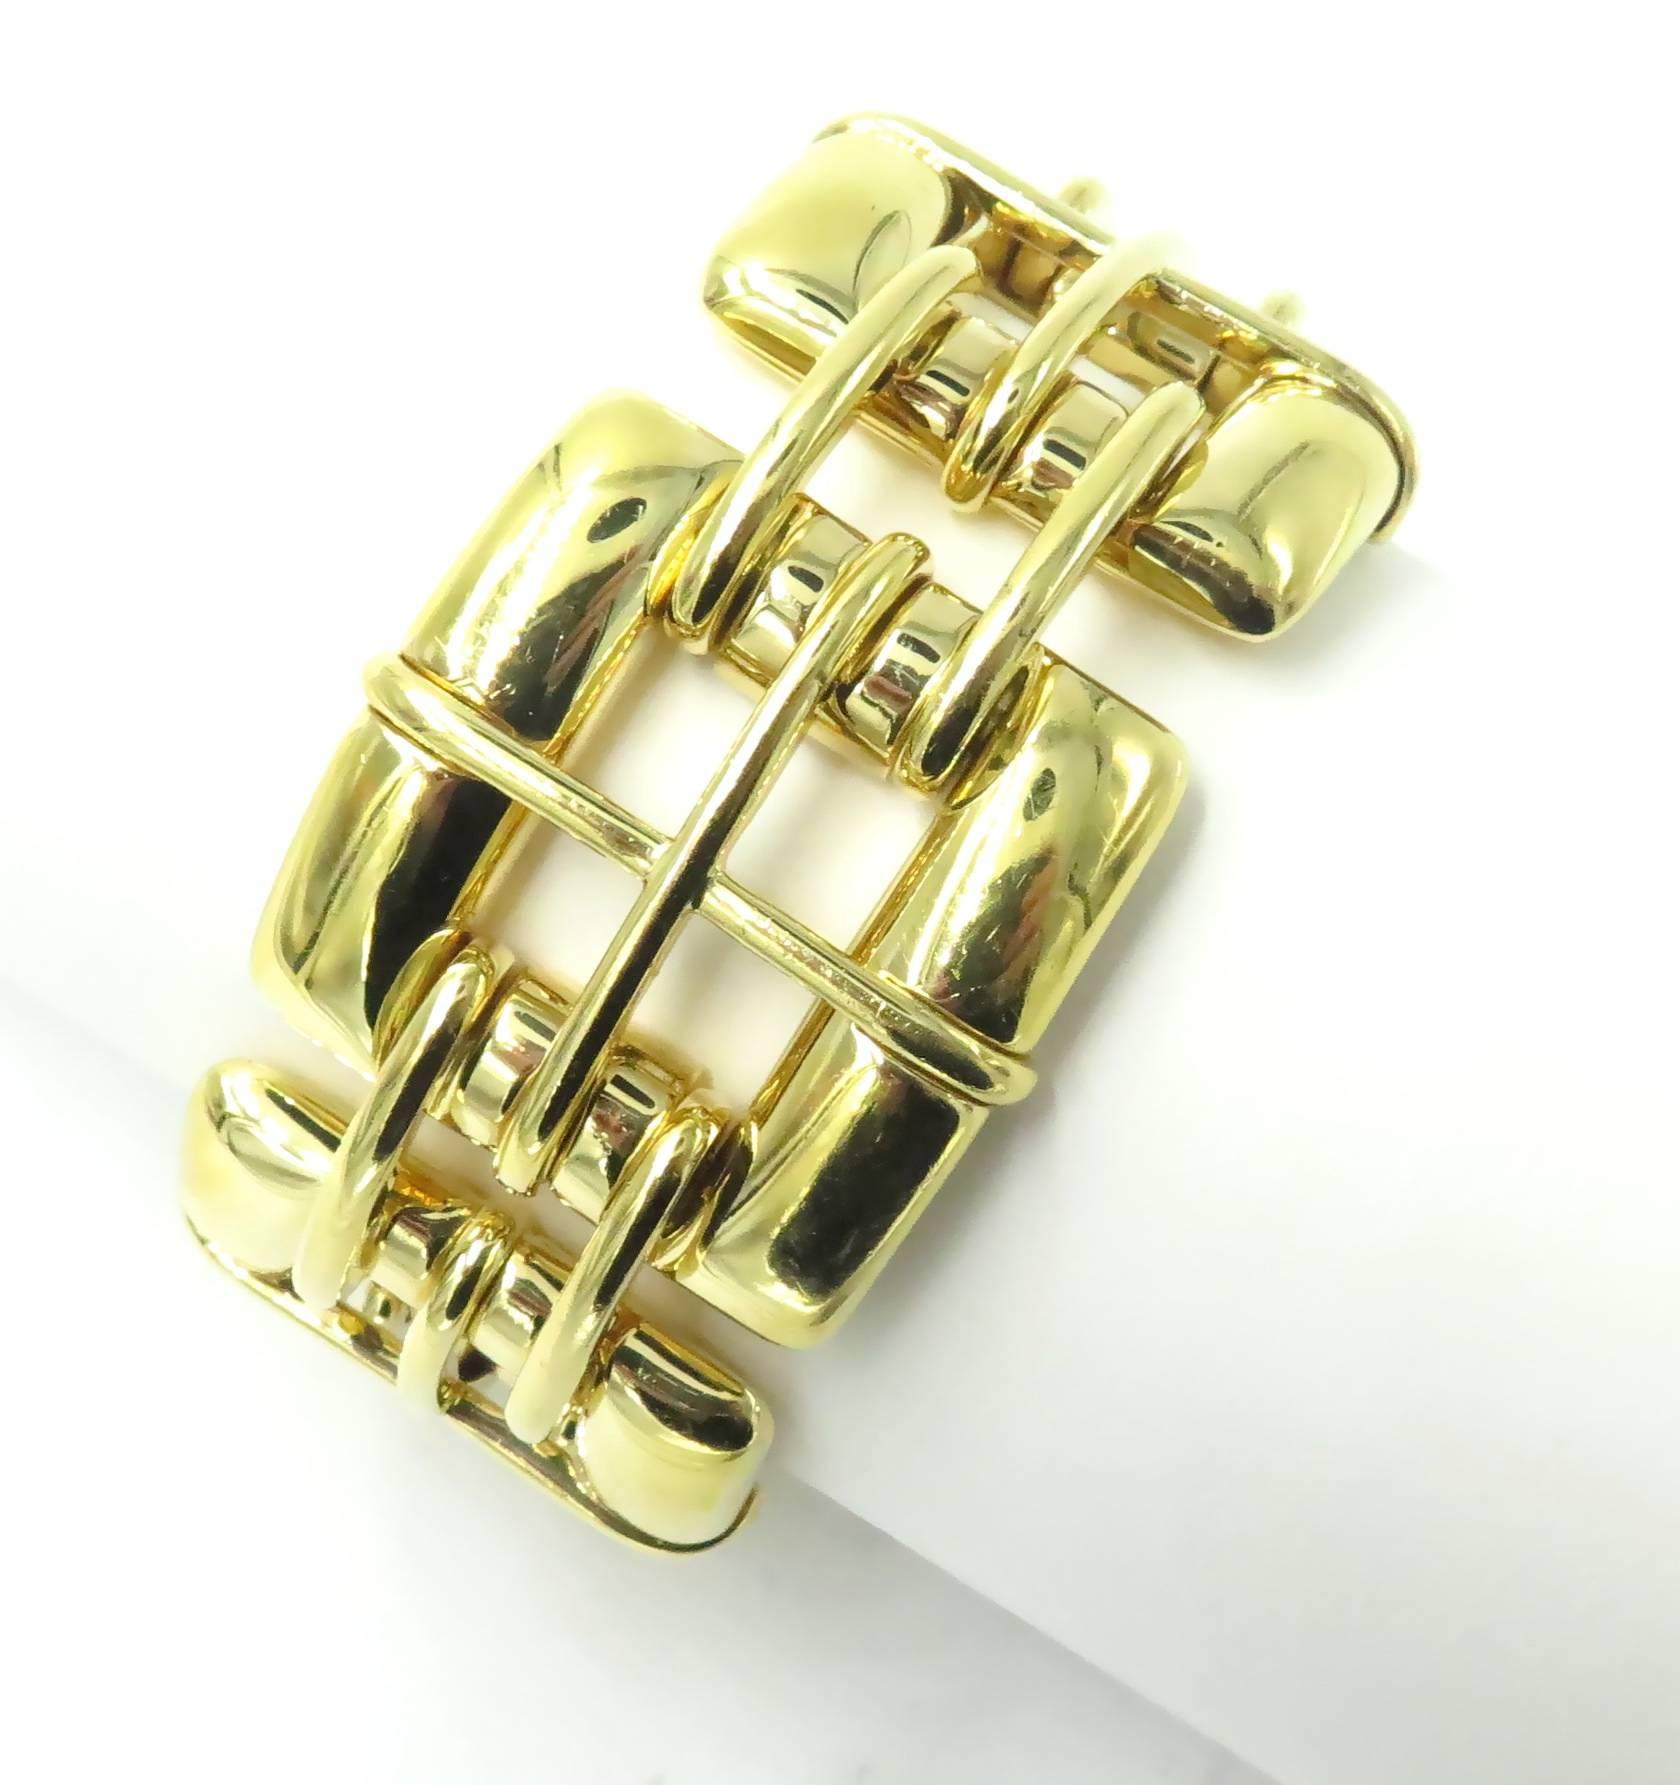 A 18 karat yellow gold bracelet, Tiffany & Co. Designed as a line of polished gold rectangular links of windowpane design. Length is approximately 7 1/2 inches. Gross weight is approximately 118.1 grams. Stamped © 2001, Tiffany & Co., 750, Italy. 